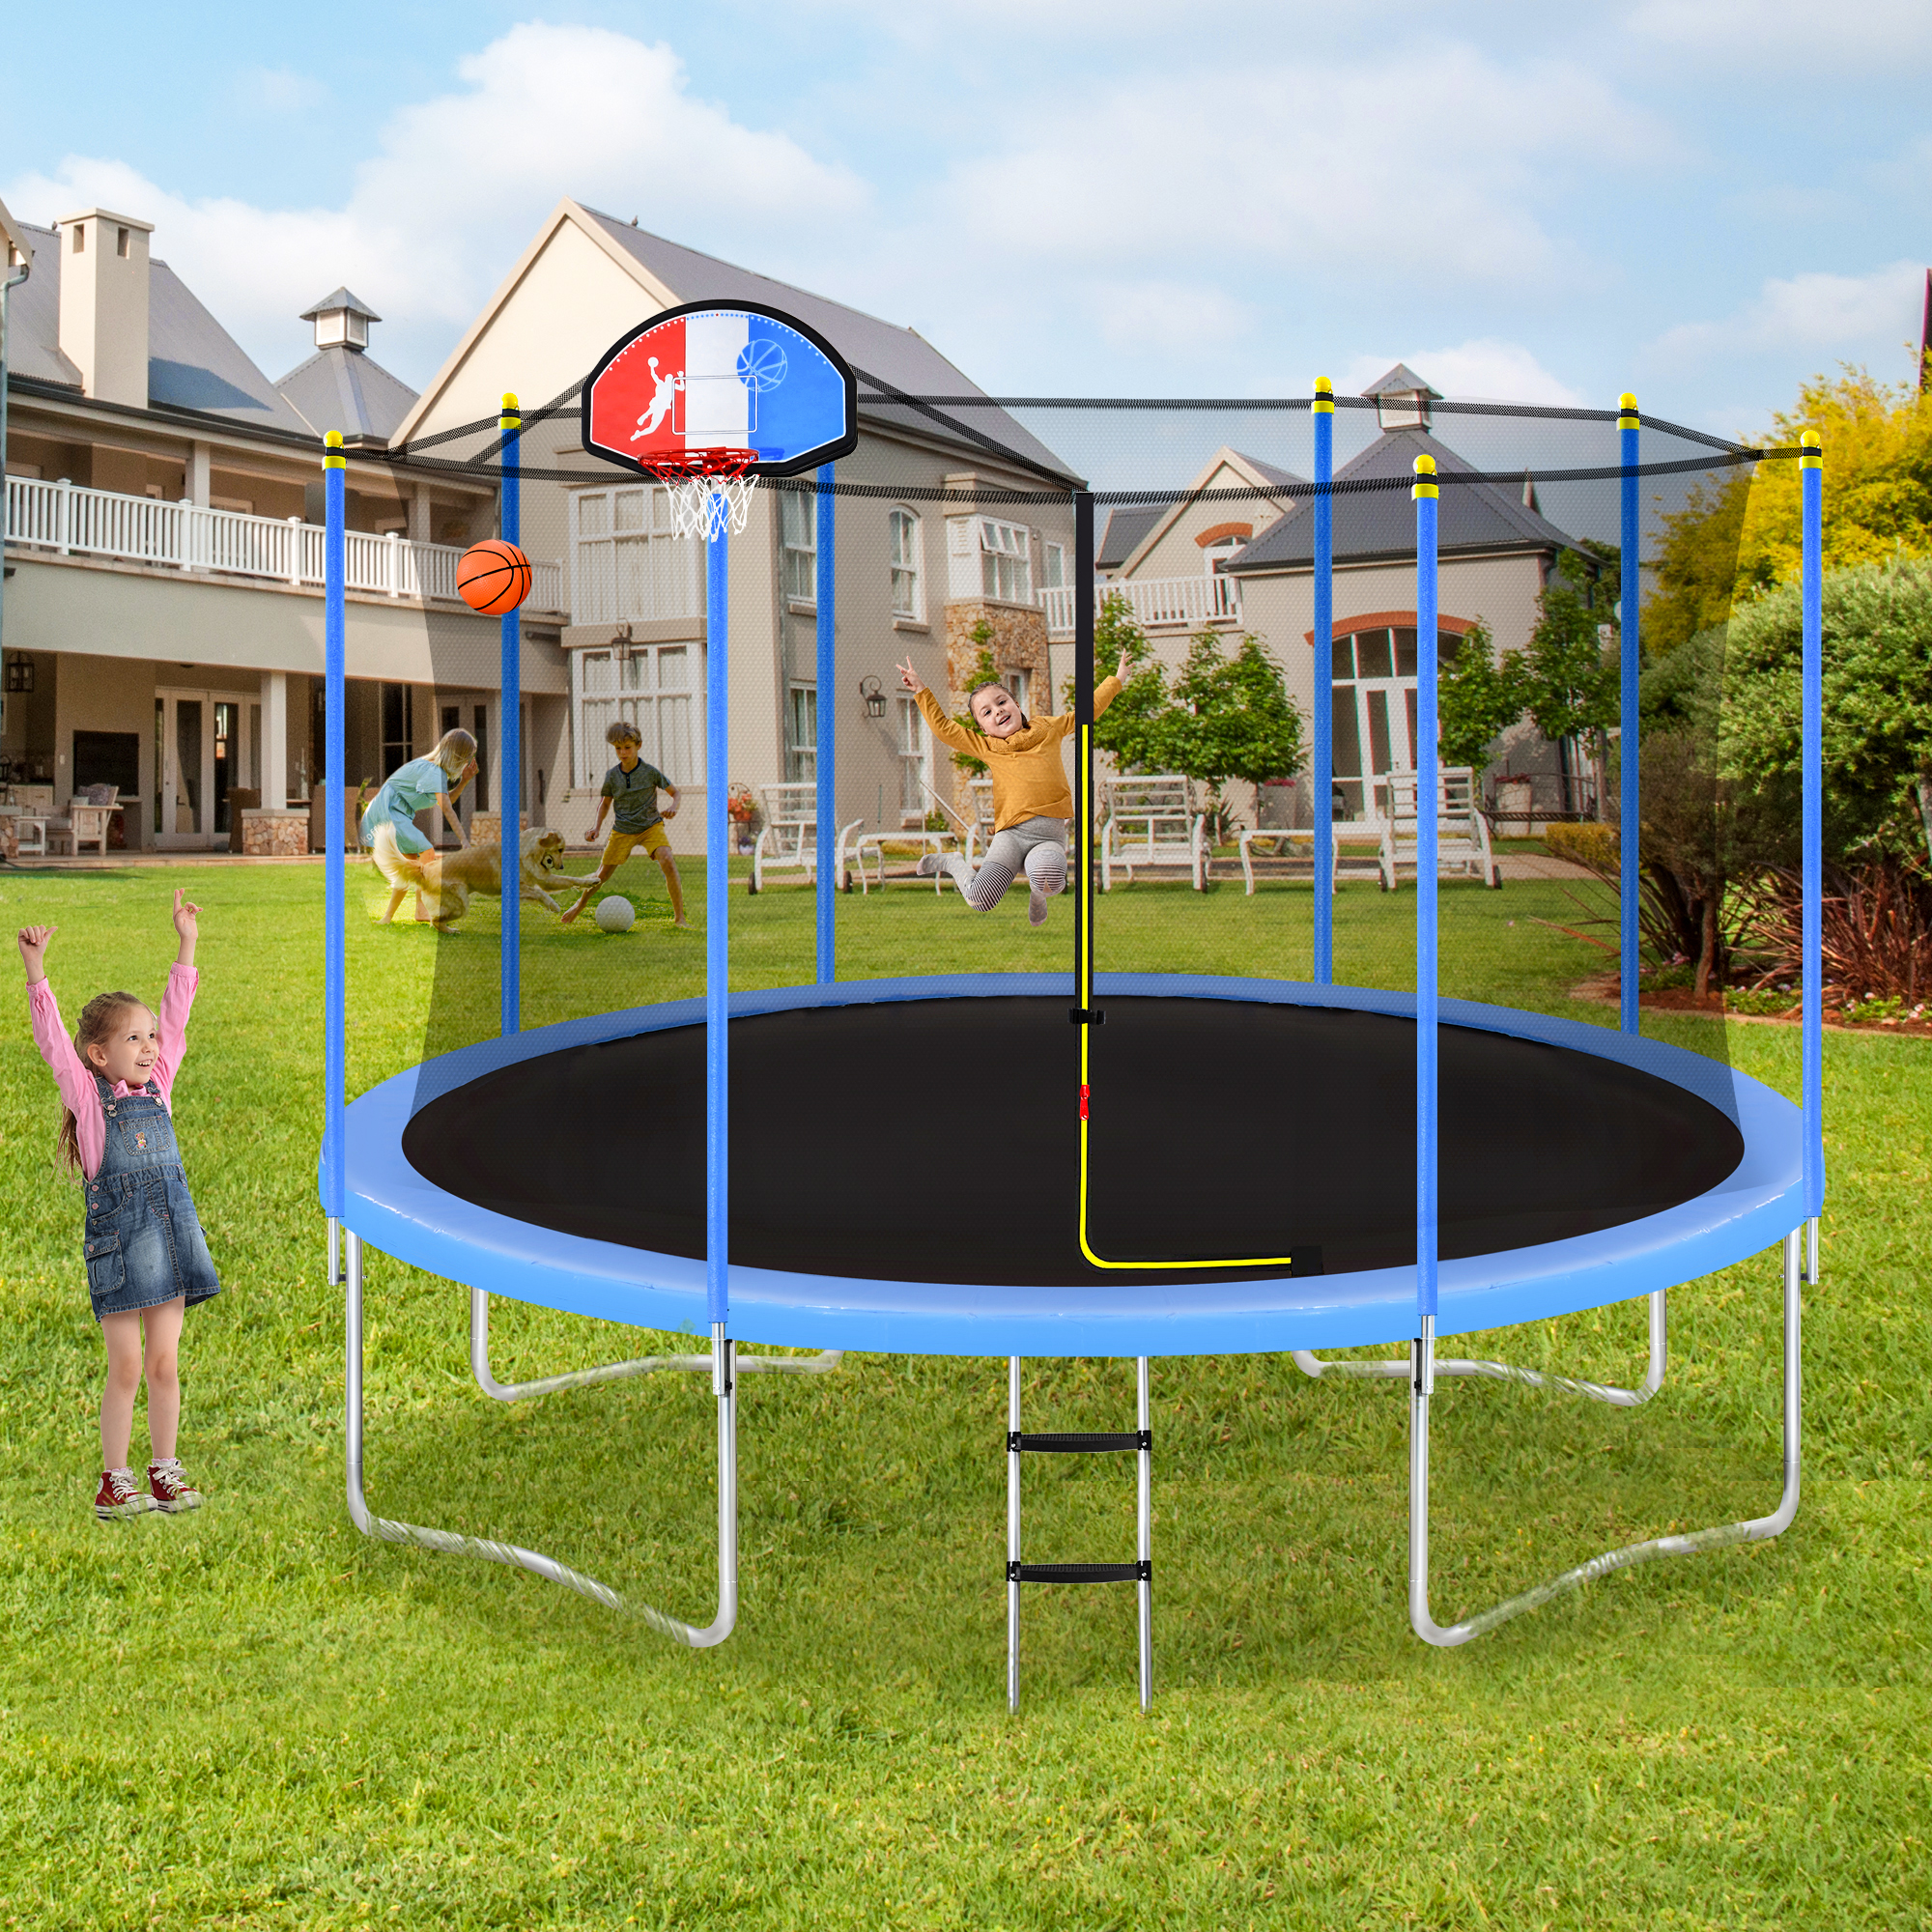 14FT Trampoline for Kids with Safety Enclosure Net, Basketball Hoop and Ladder, Easy Assembly Round Outdoor Recreational Trampoline-CASAINC